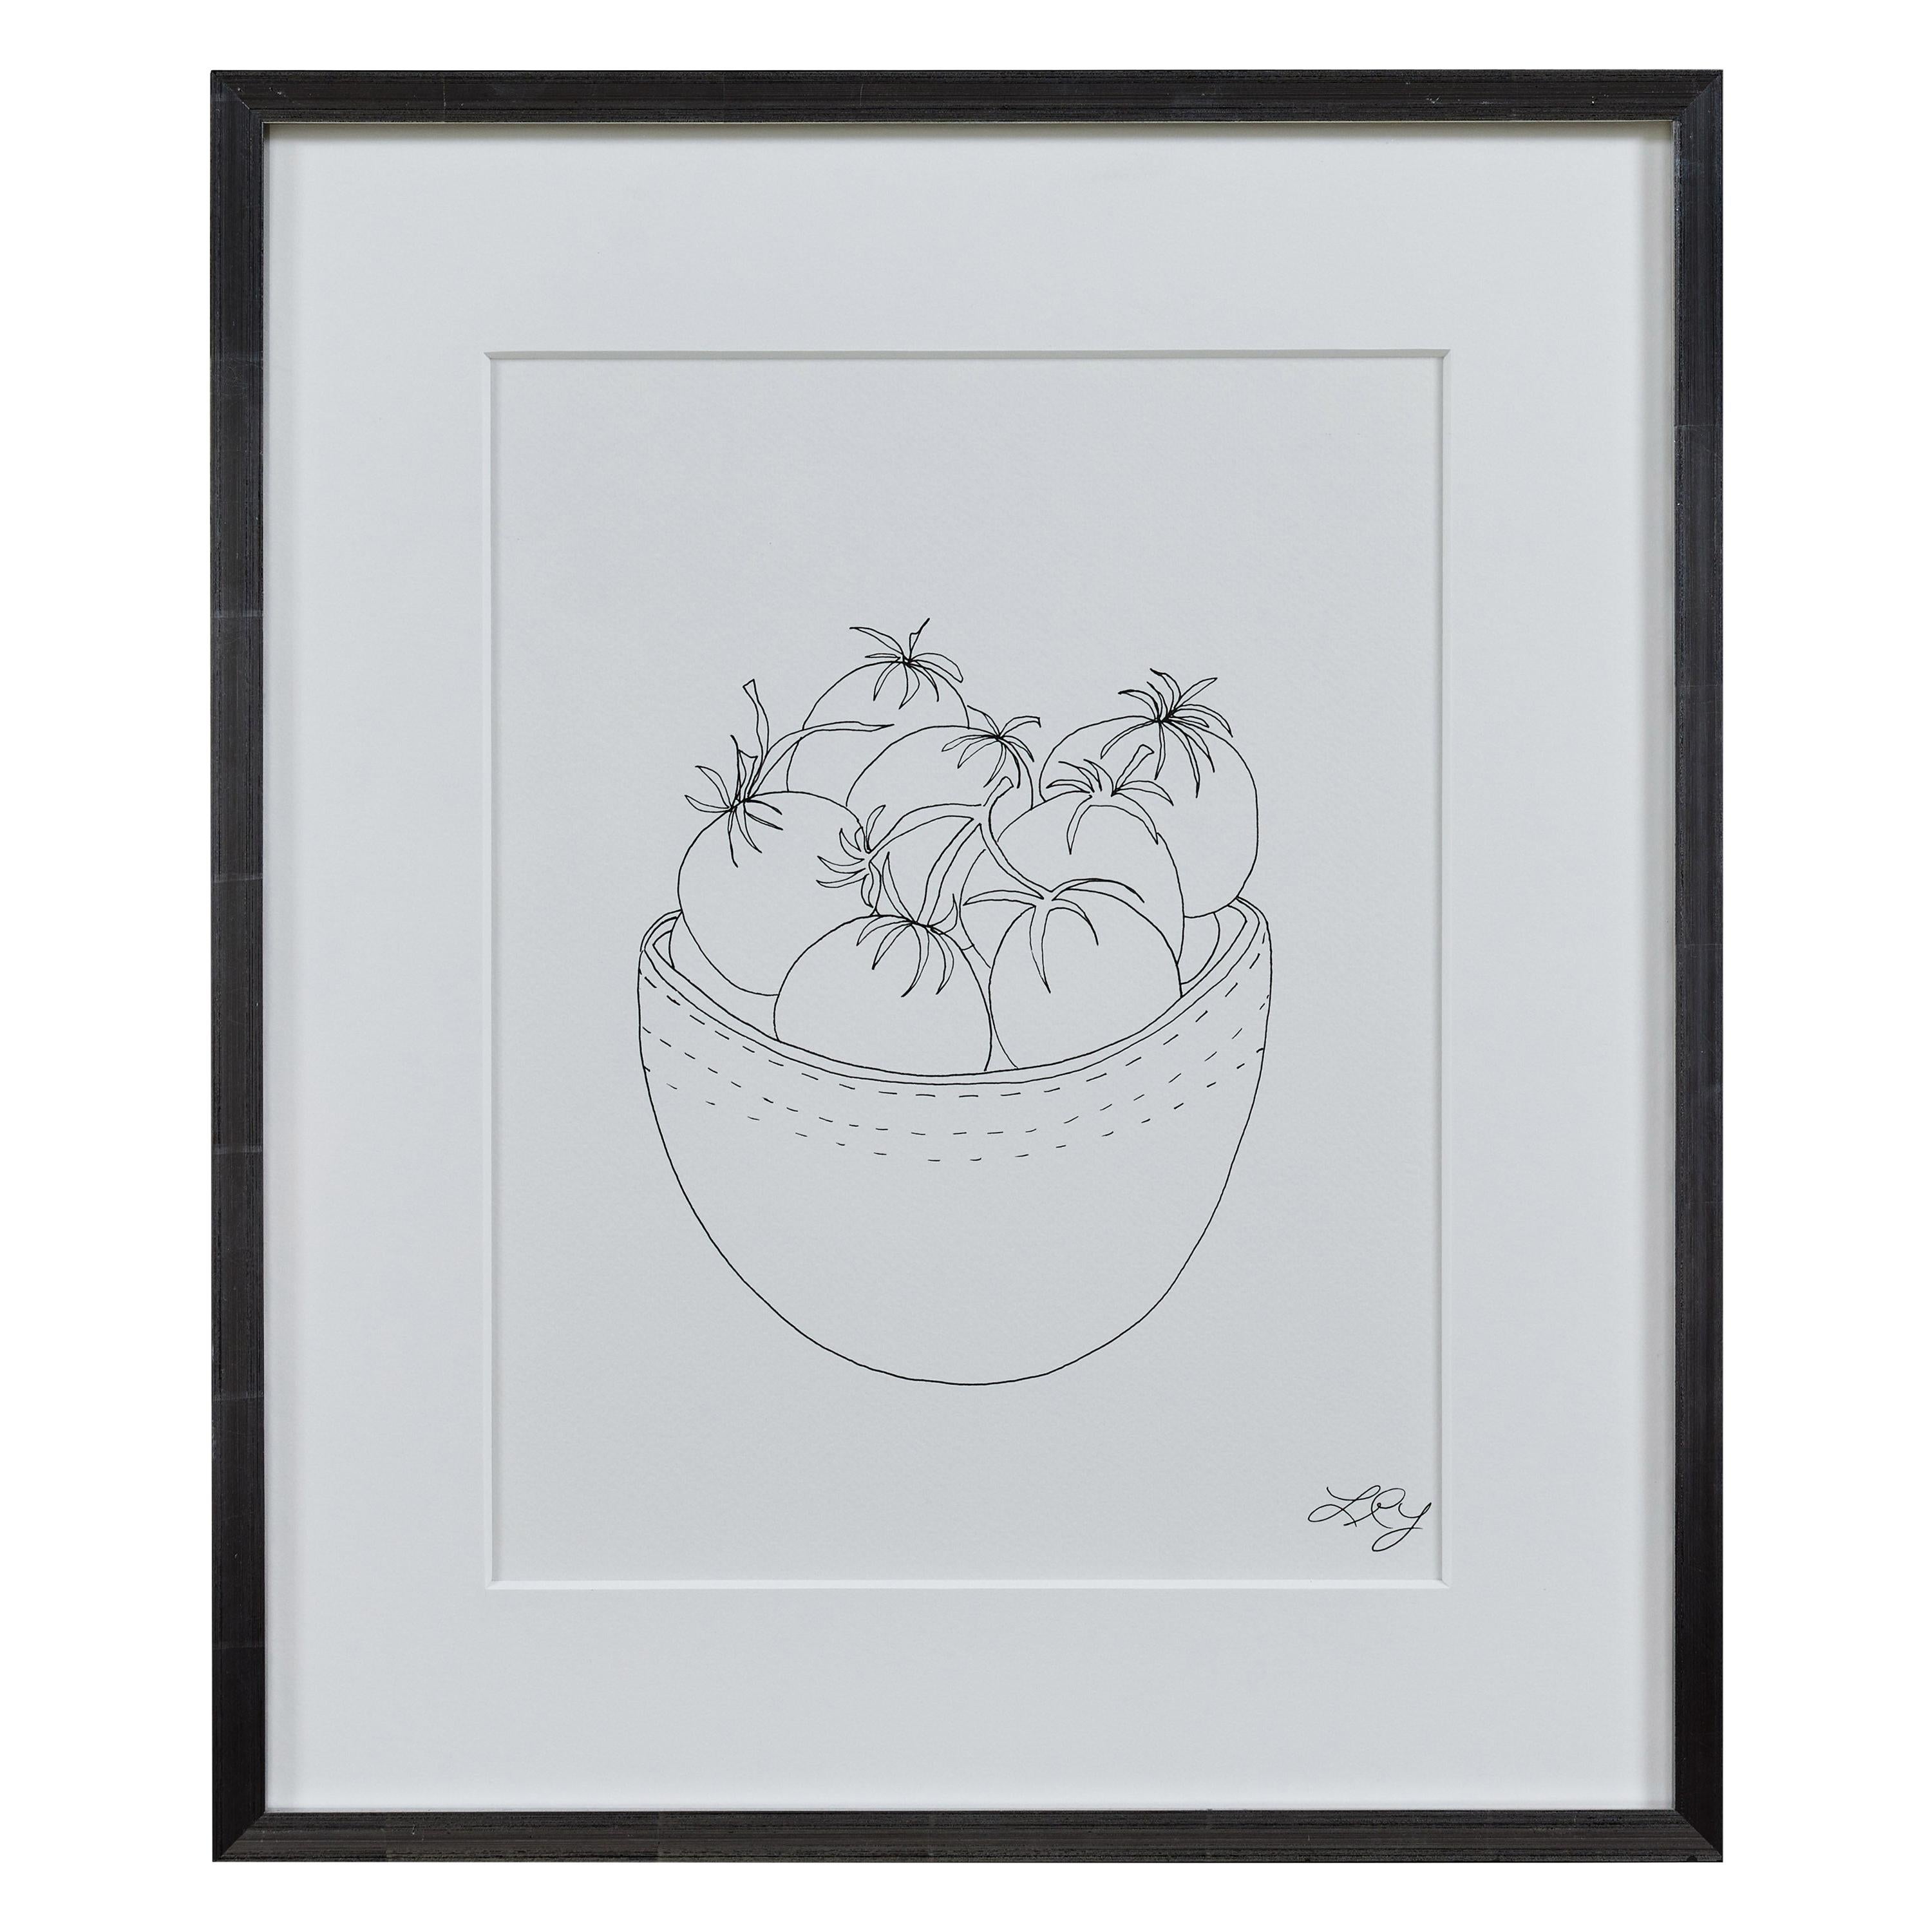 Liz Young, Still Life of Tomatoes in a Bowl, Ink on Paper